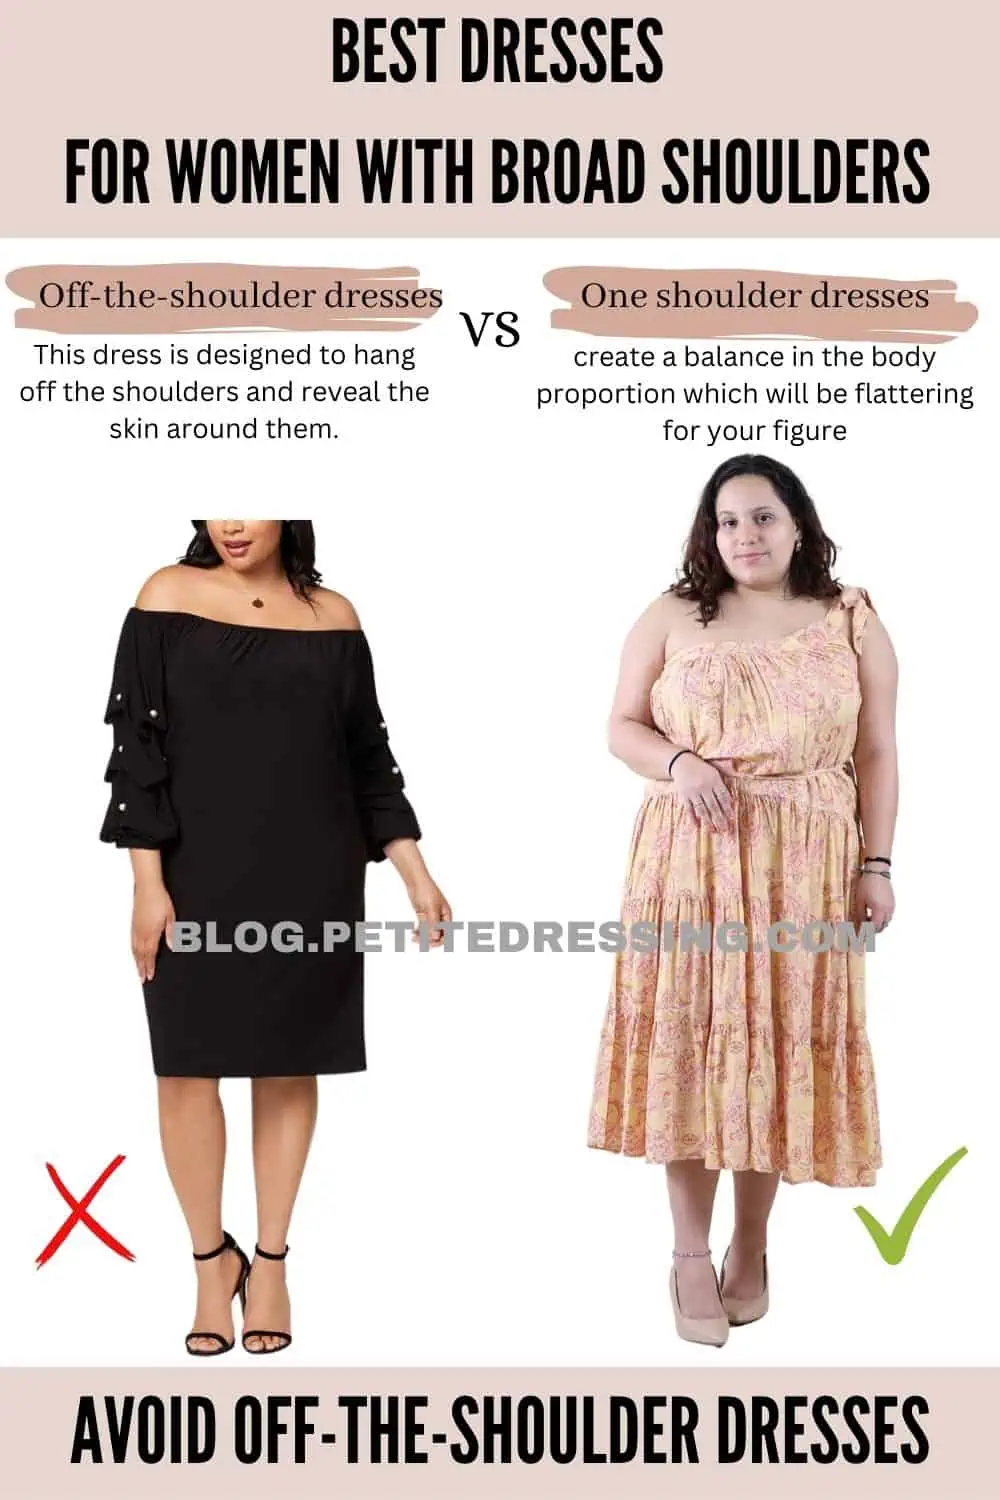 4 Ways to Style Broad Shoulders #broad #shoulder #women #outfits